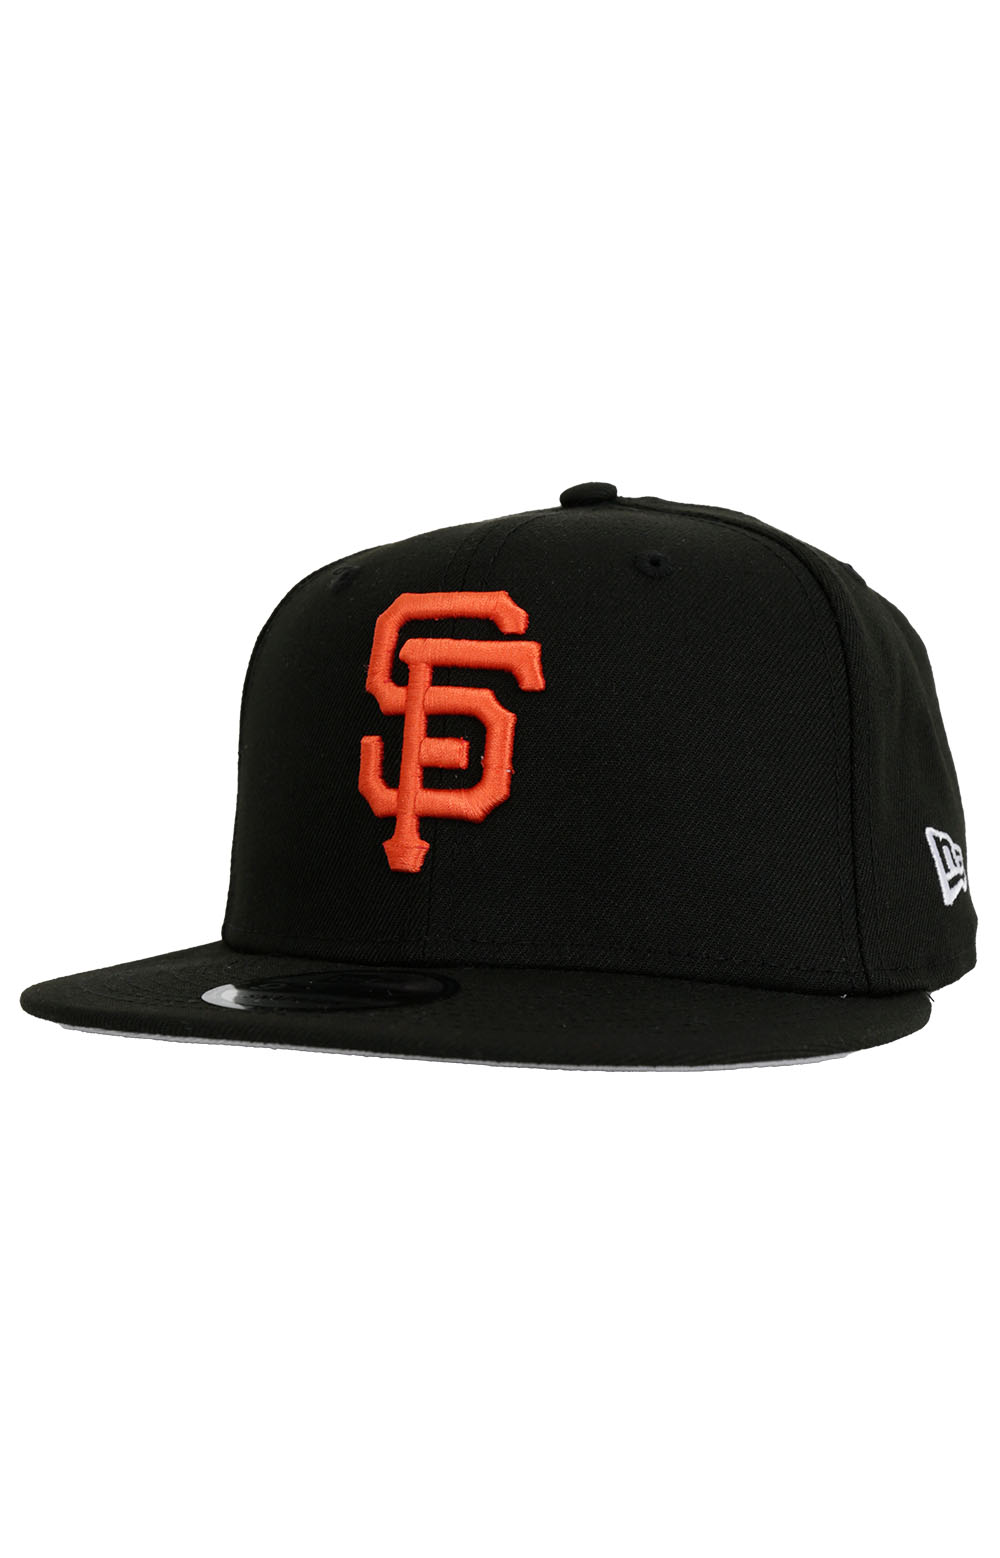 San Francisco Giants 10 WS Side Patch 9Fifty Snap-Back Hat